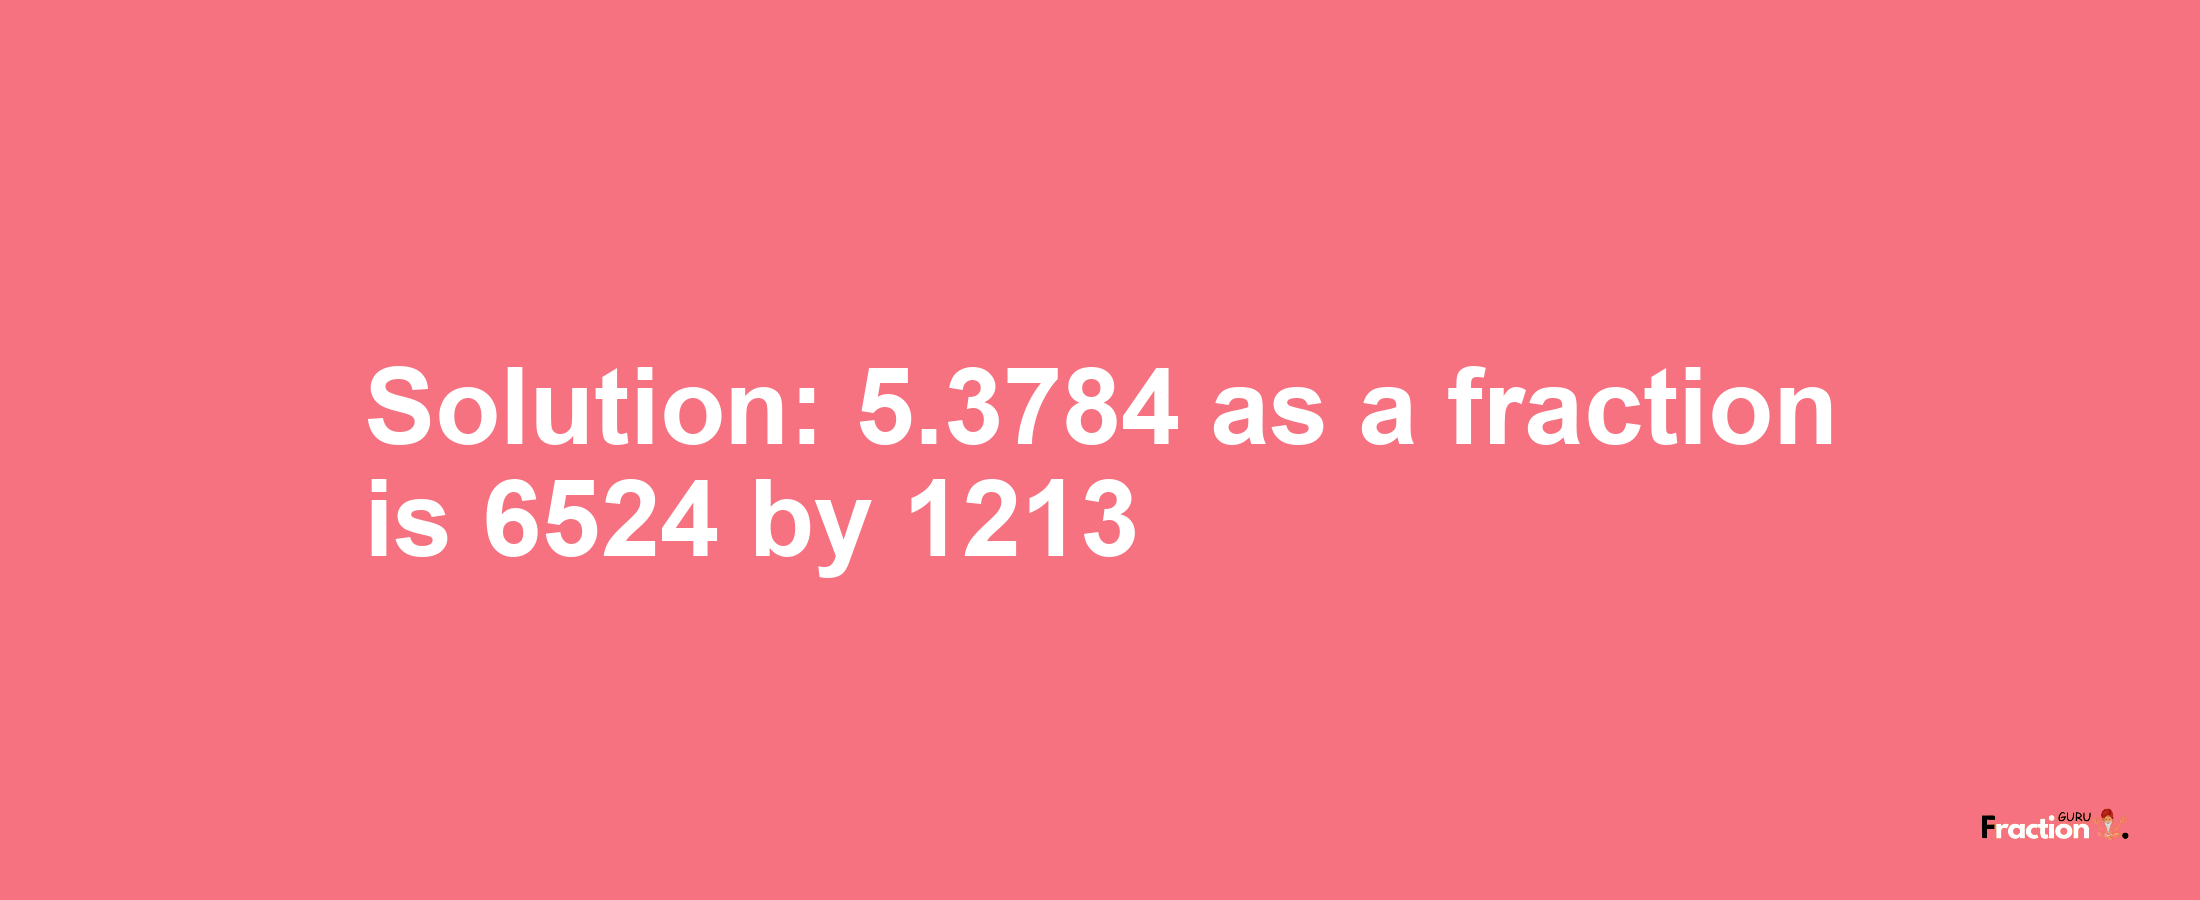 Solution:5.3784 as a fraction is 6524/1213